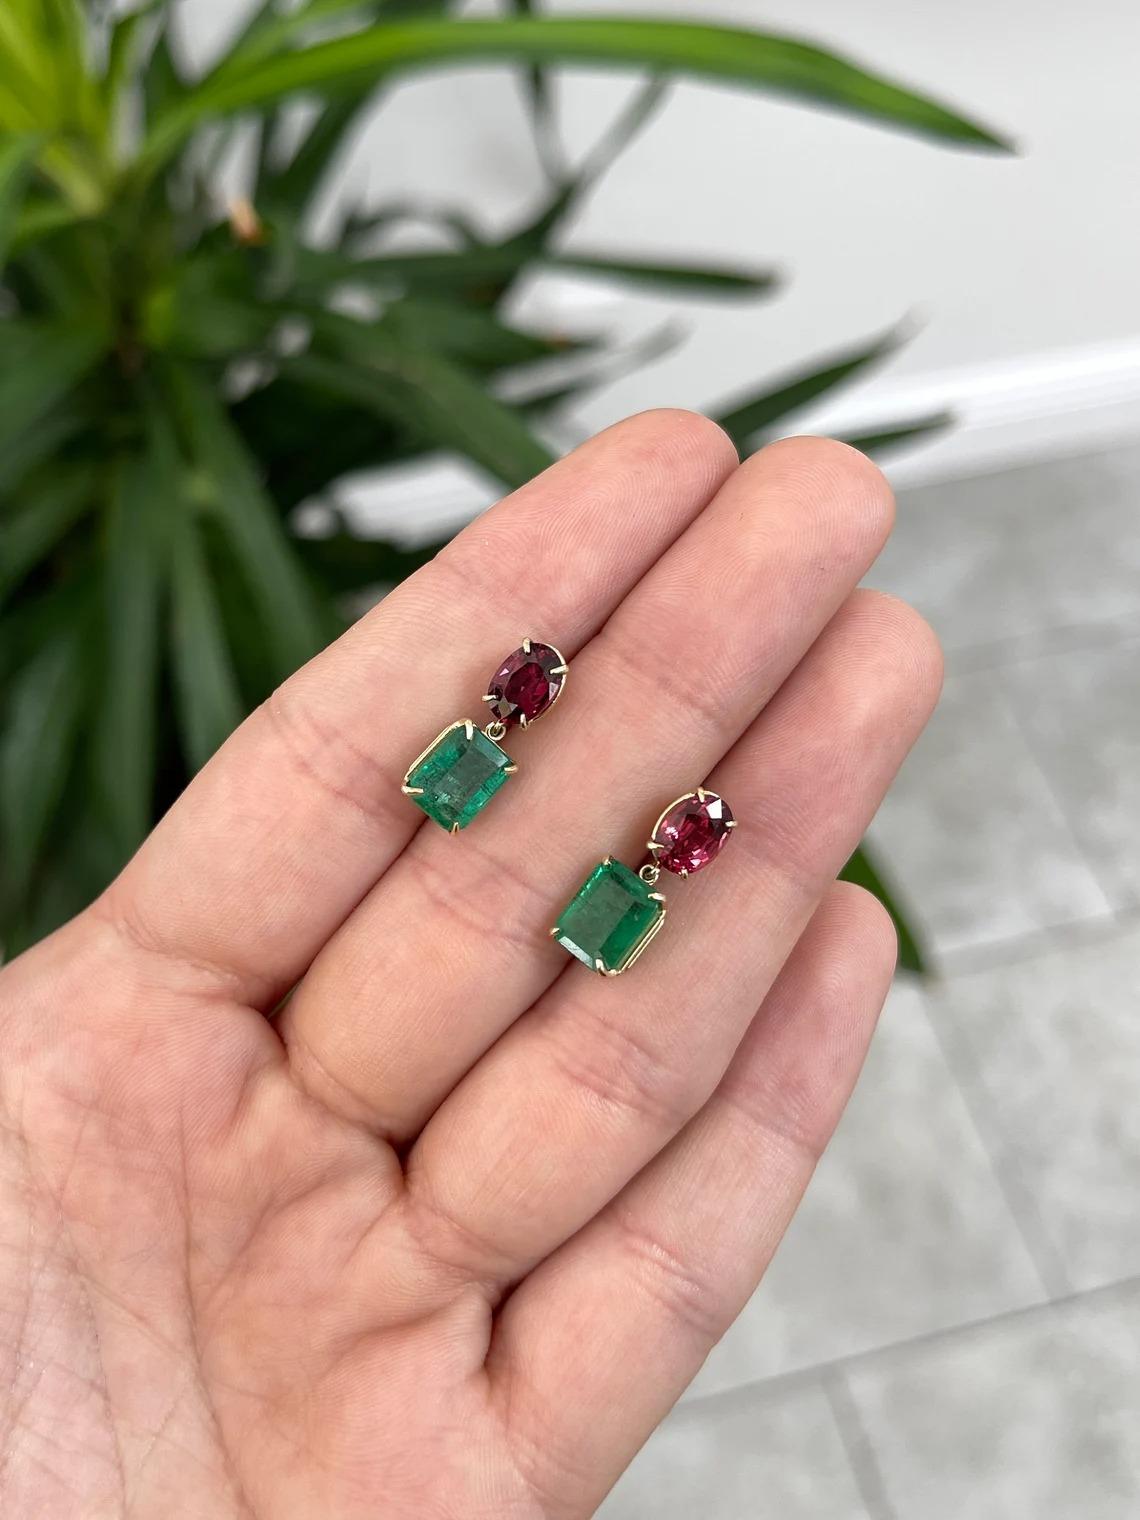 A stupendous pair of natural emerald and spinel dangle earrings. Stunning emerald cut emeralds dangle; showcasing a gorgeous forest green color, very good luster, and good clarity. Accenting above are a pair of sensation natural oval cut spinels